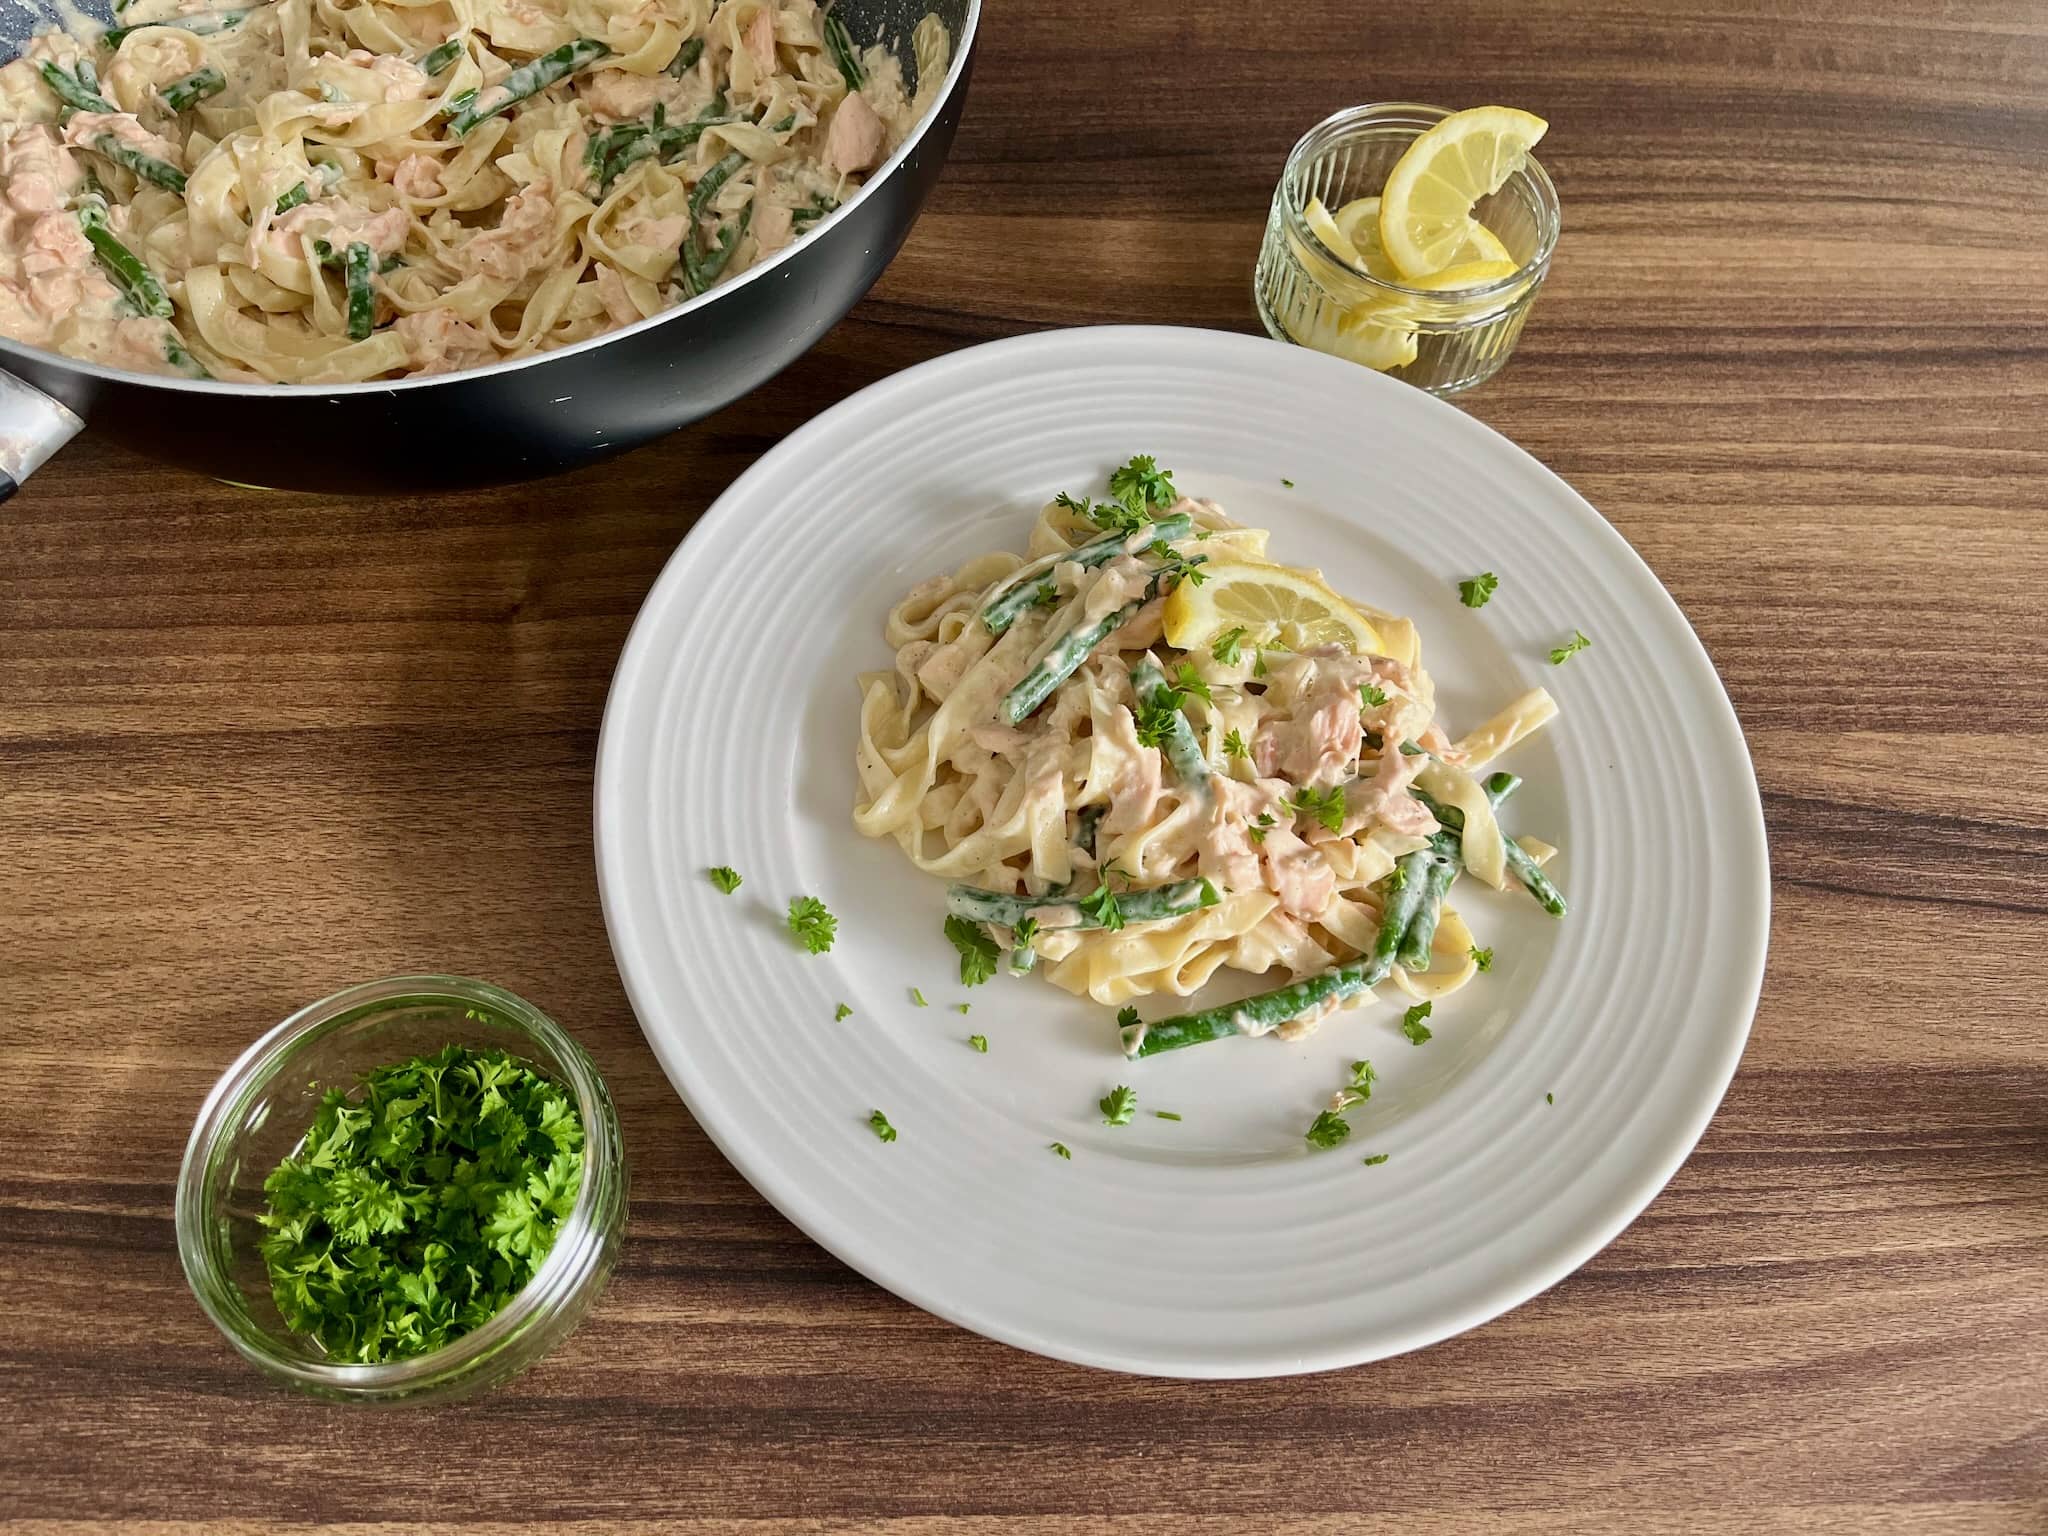 Salmon tagliatelle with a slice of lemon and scatter over with fresh parsley